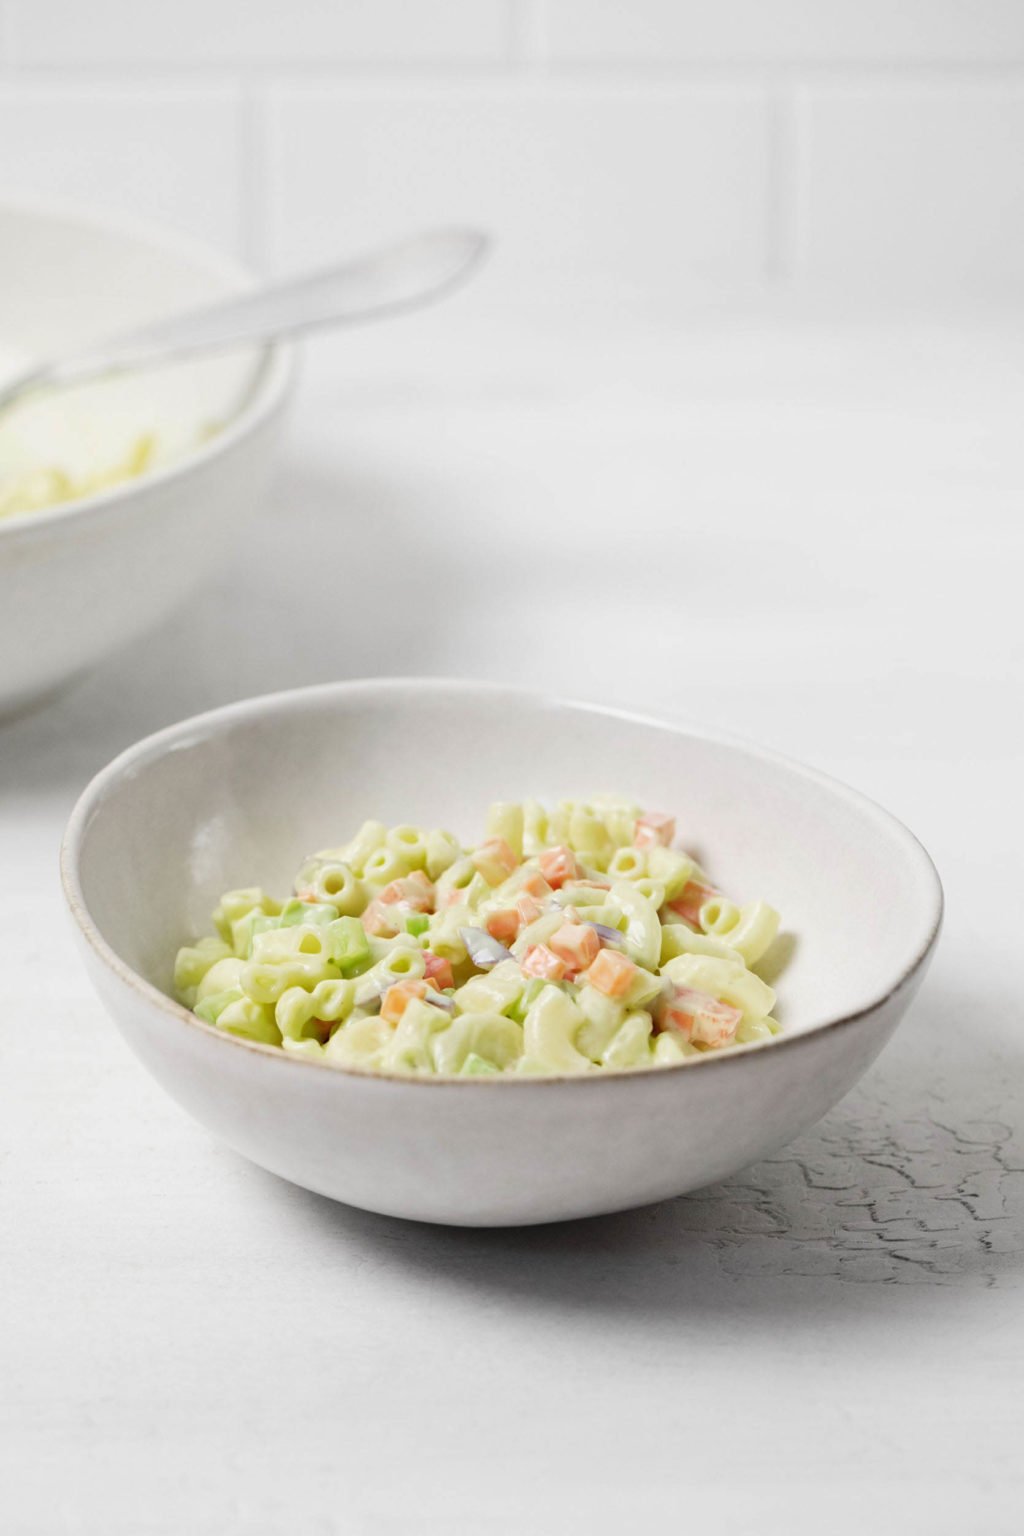 Two bowls of a creamy vegan pasta salad rest on a white surface.